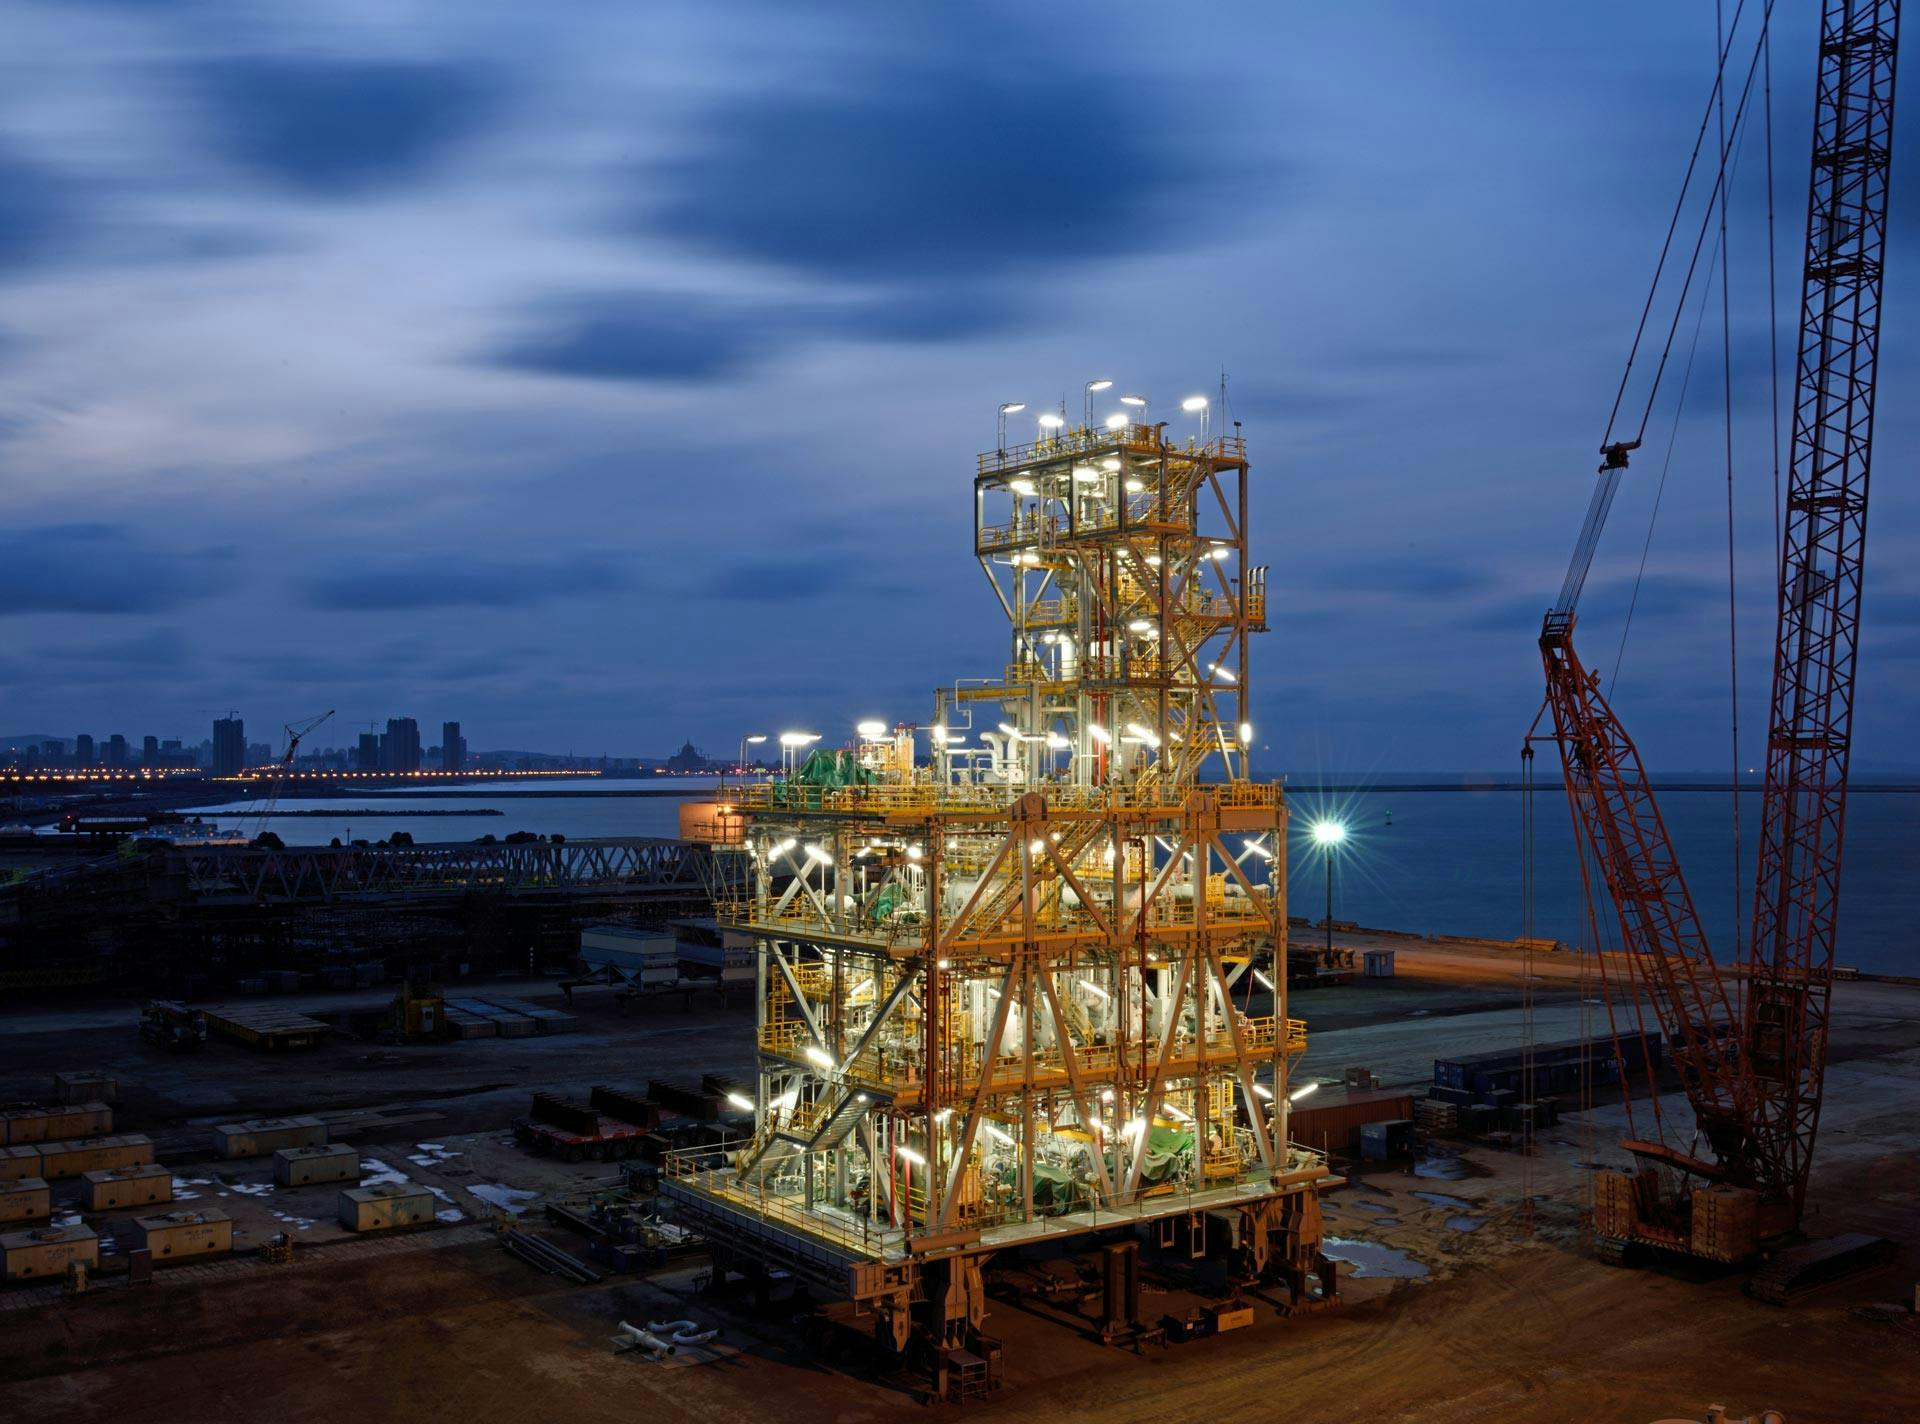 complete processing systems for both on- and offshore installations